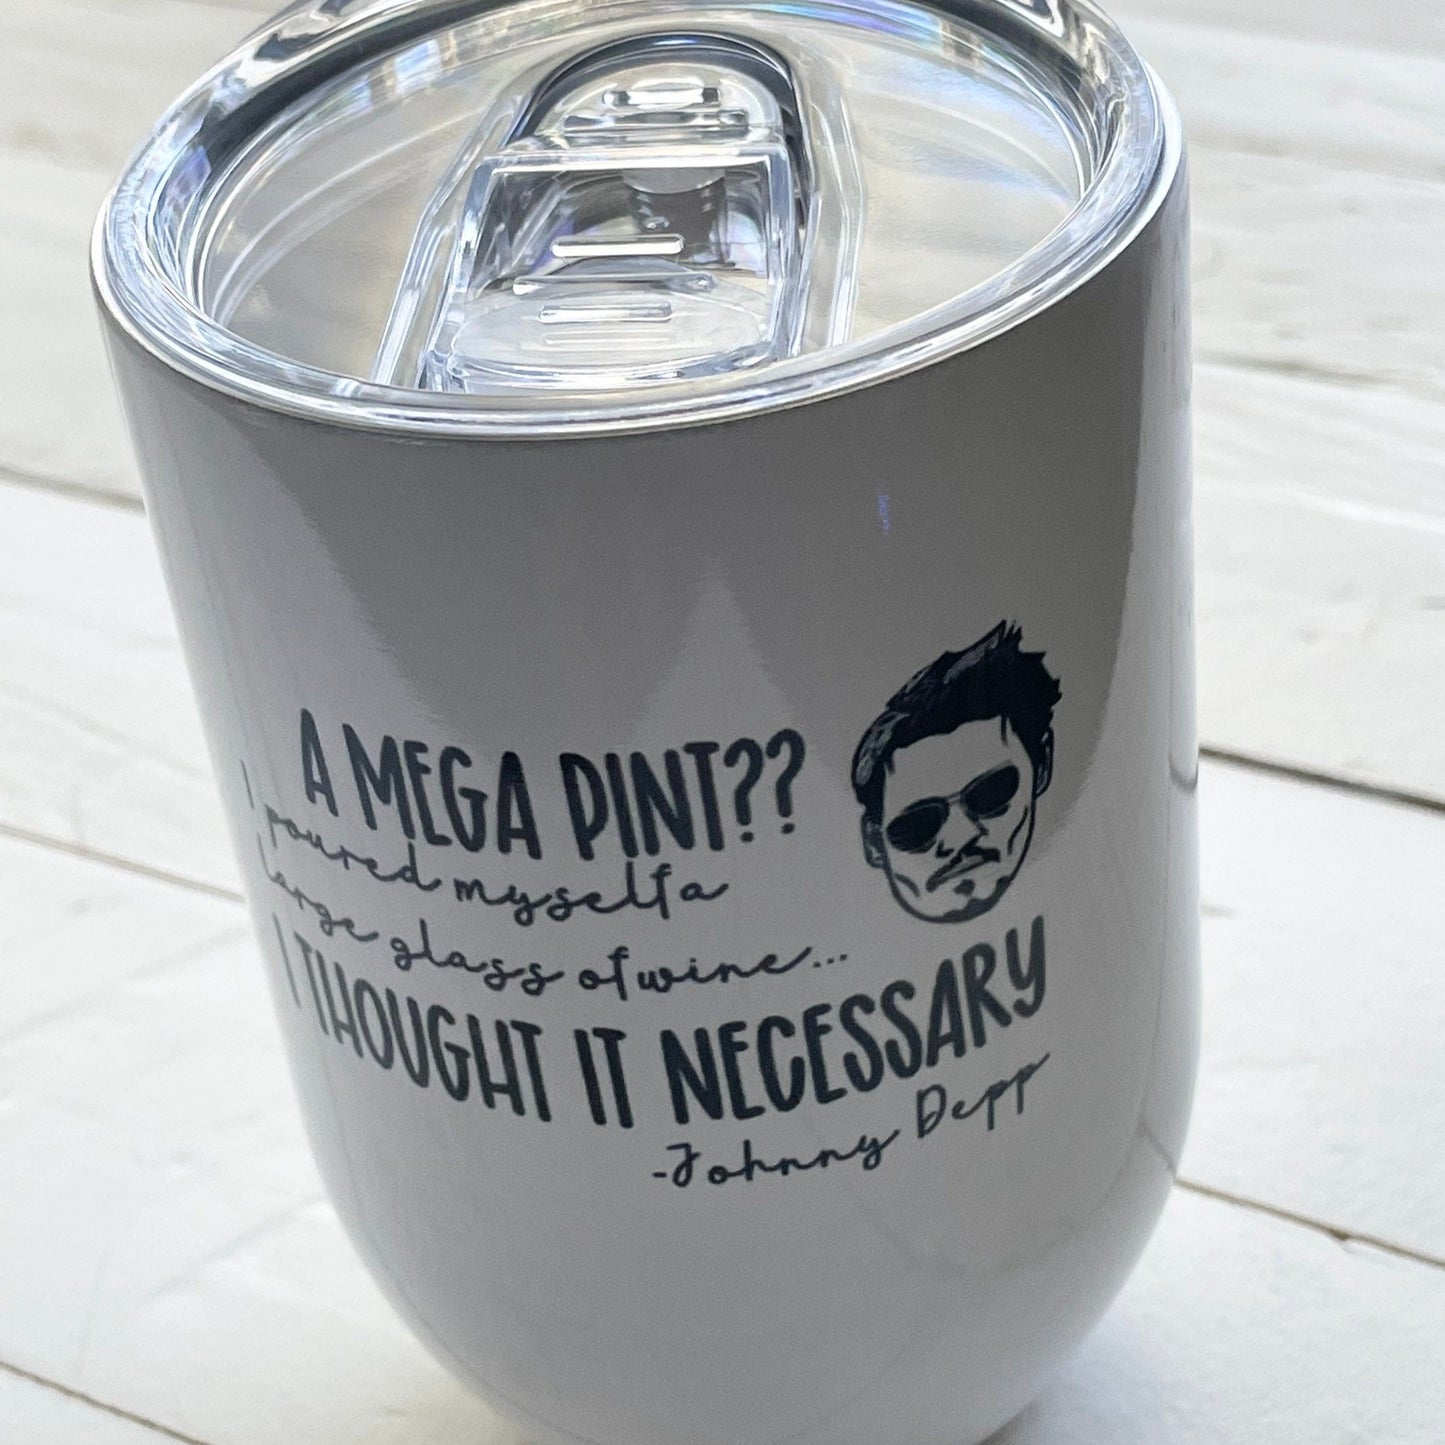 A Mega Pint, Johnny Depp quote, 10oz Stainless Steel Wine Travel Tumbler